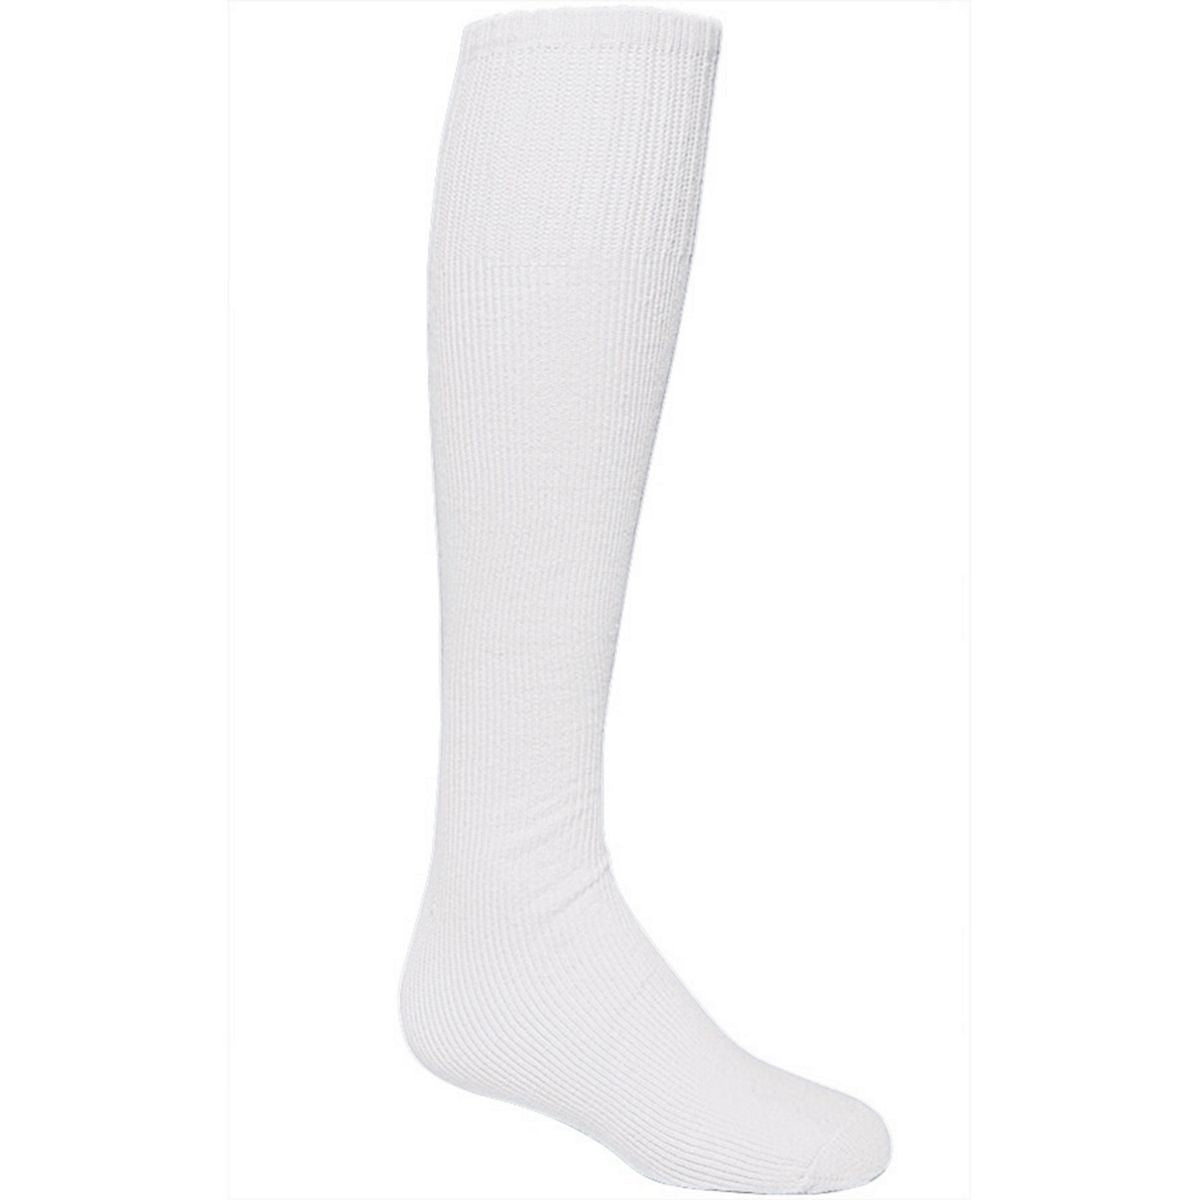 High 5 Athletic  Sock in White  -Part of the Accessories, High5-Products, Accessories-Socks product lines at KanaleyCreations.com